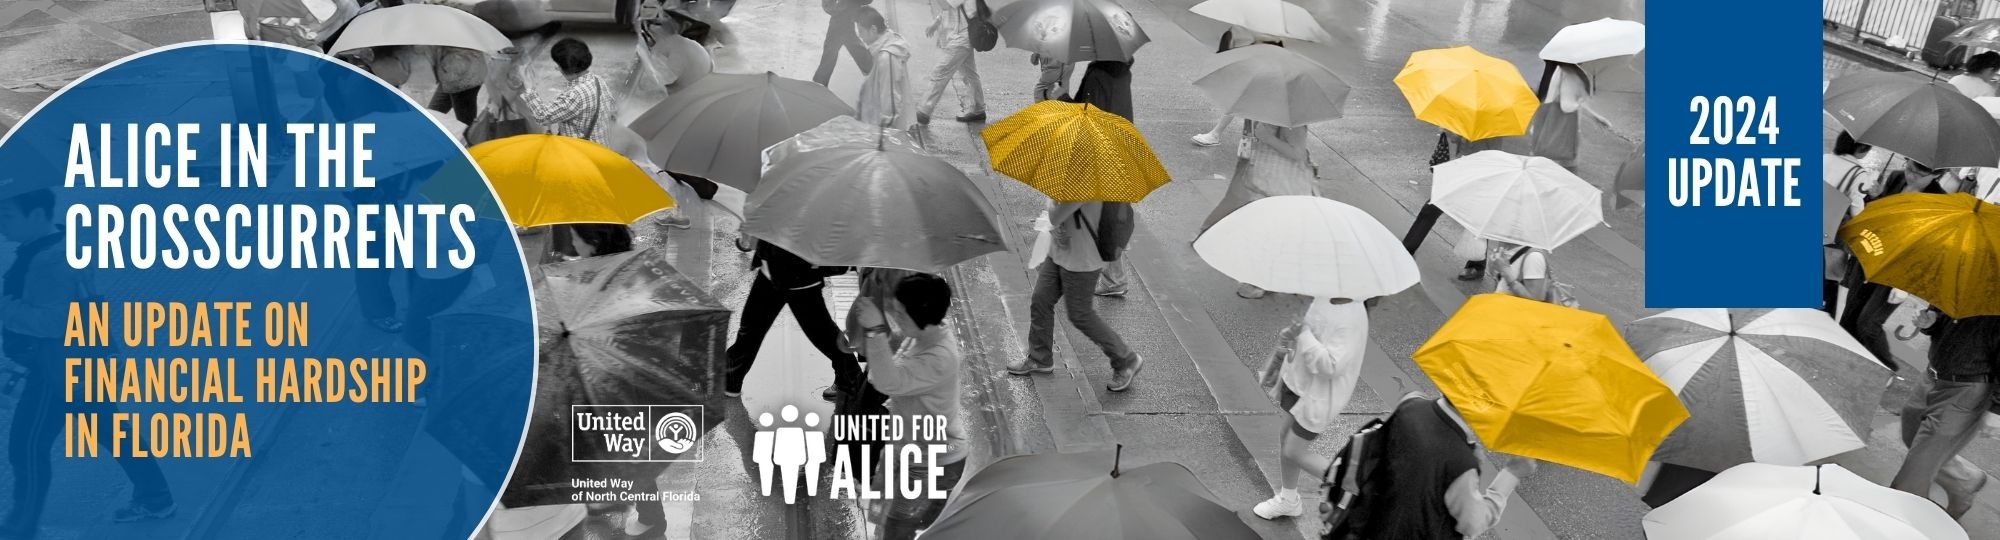 Black and white photo of people walking along city street holding umbrellas with some umbrellas shaded yellow to highlight how ALICE walks among us